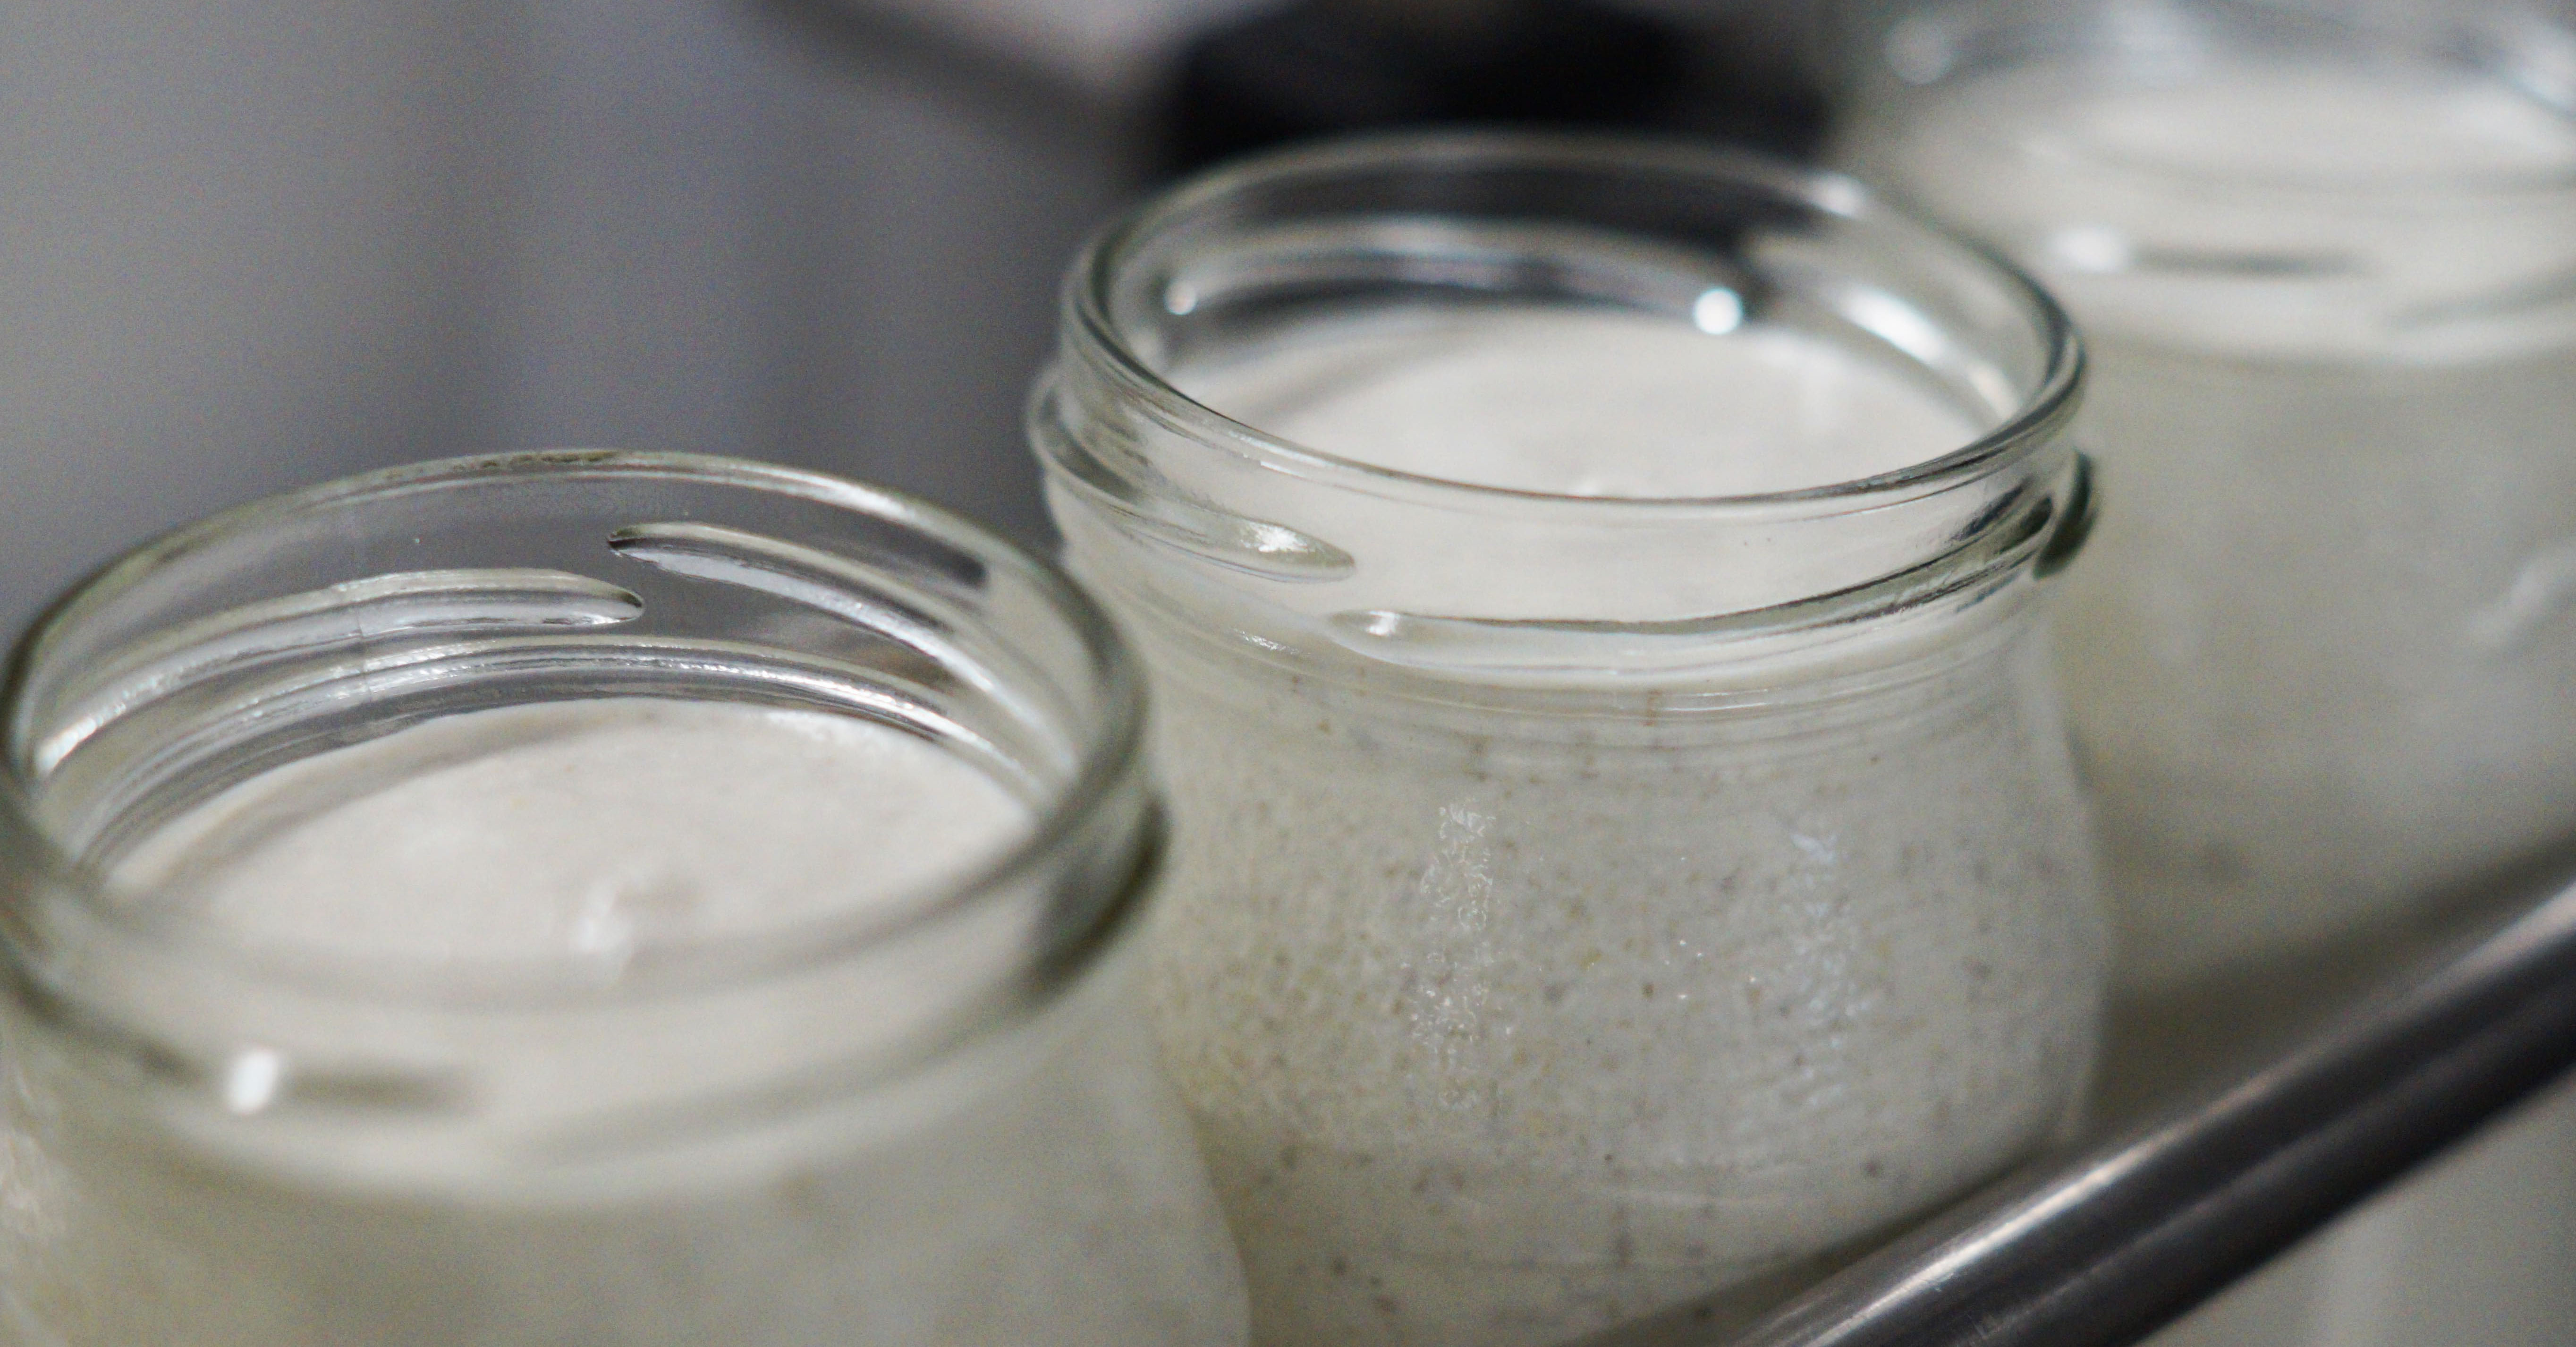 Conserverie et Moutarderie belge gives glass jars a second lease of life